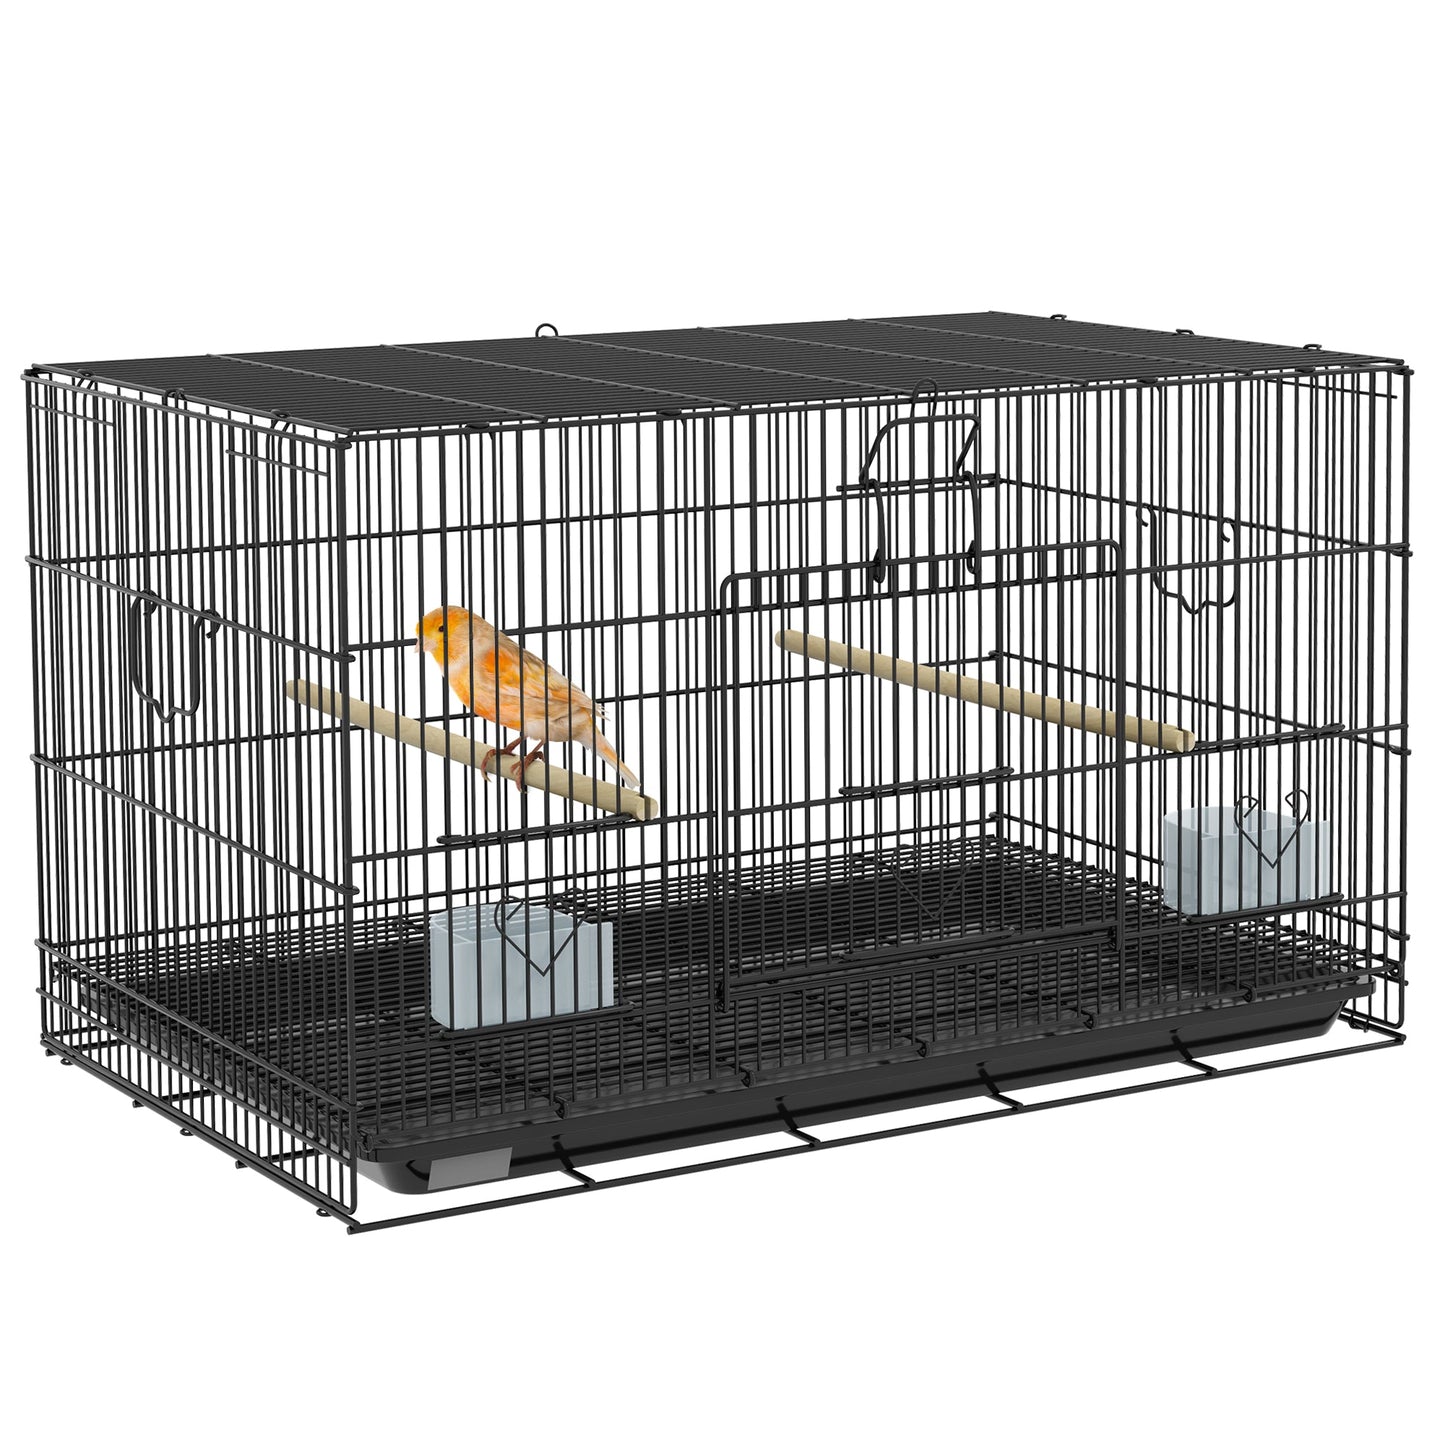 30" Birdcage for Canaries, Lovebirds Finches, Budgie Cage with Removable Tray, Bottom Mesh Panel, Wooden Perches, Food Containers at Gallery Canada